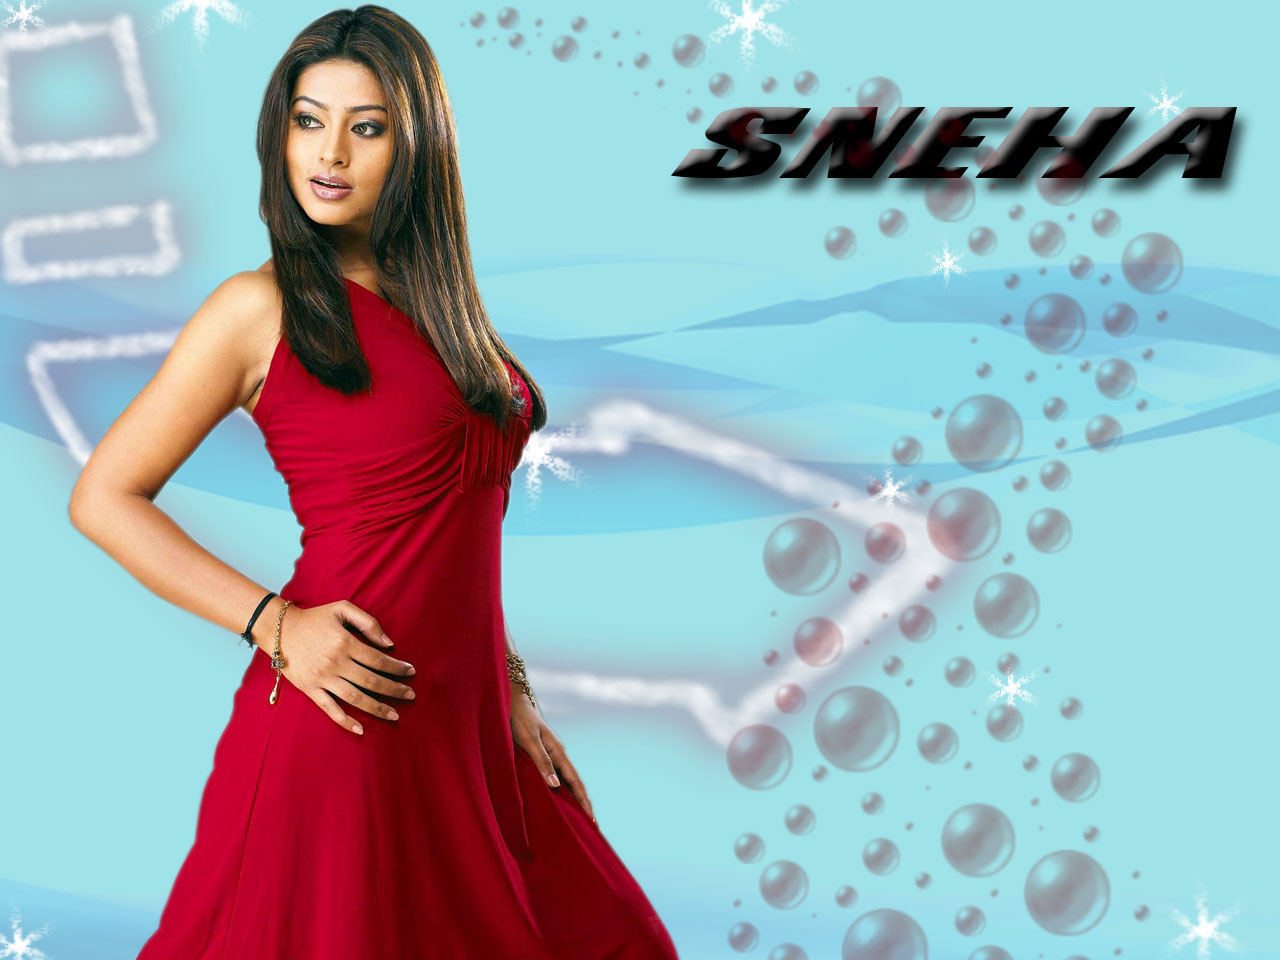 south indian actress sneha in red hot dress